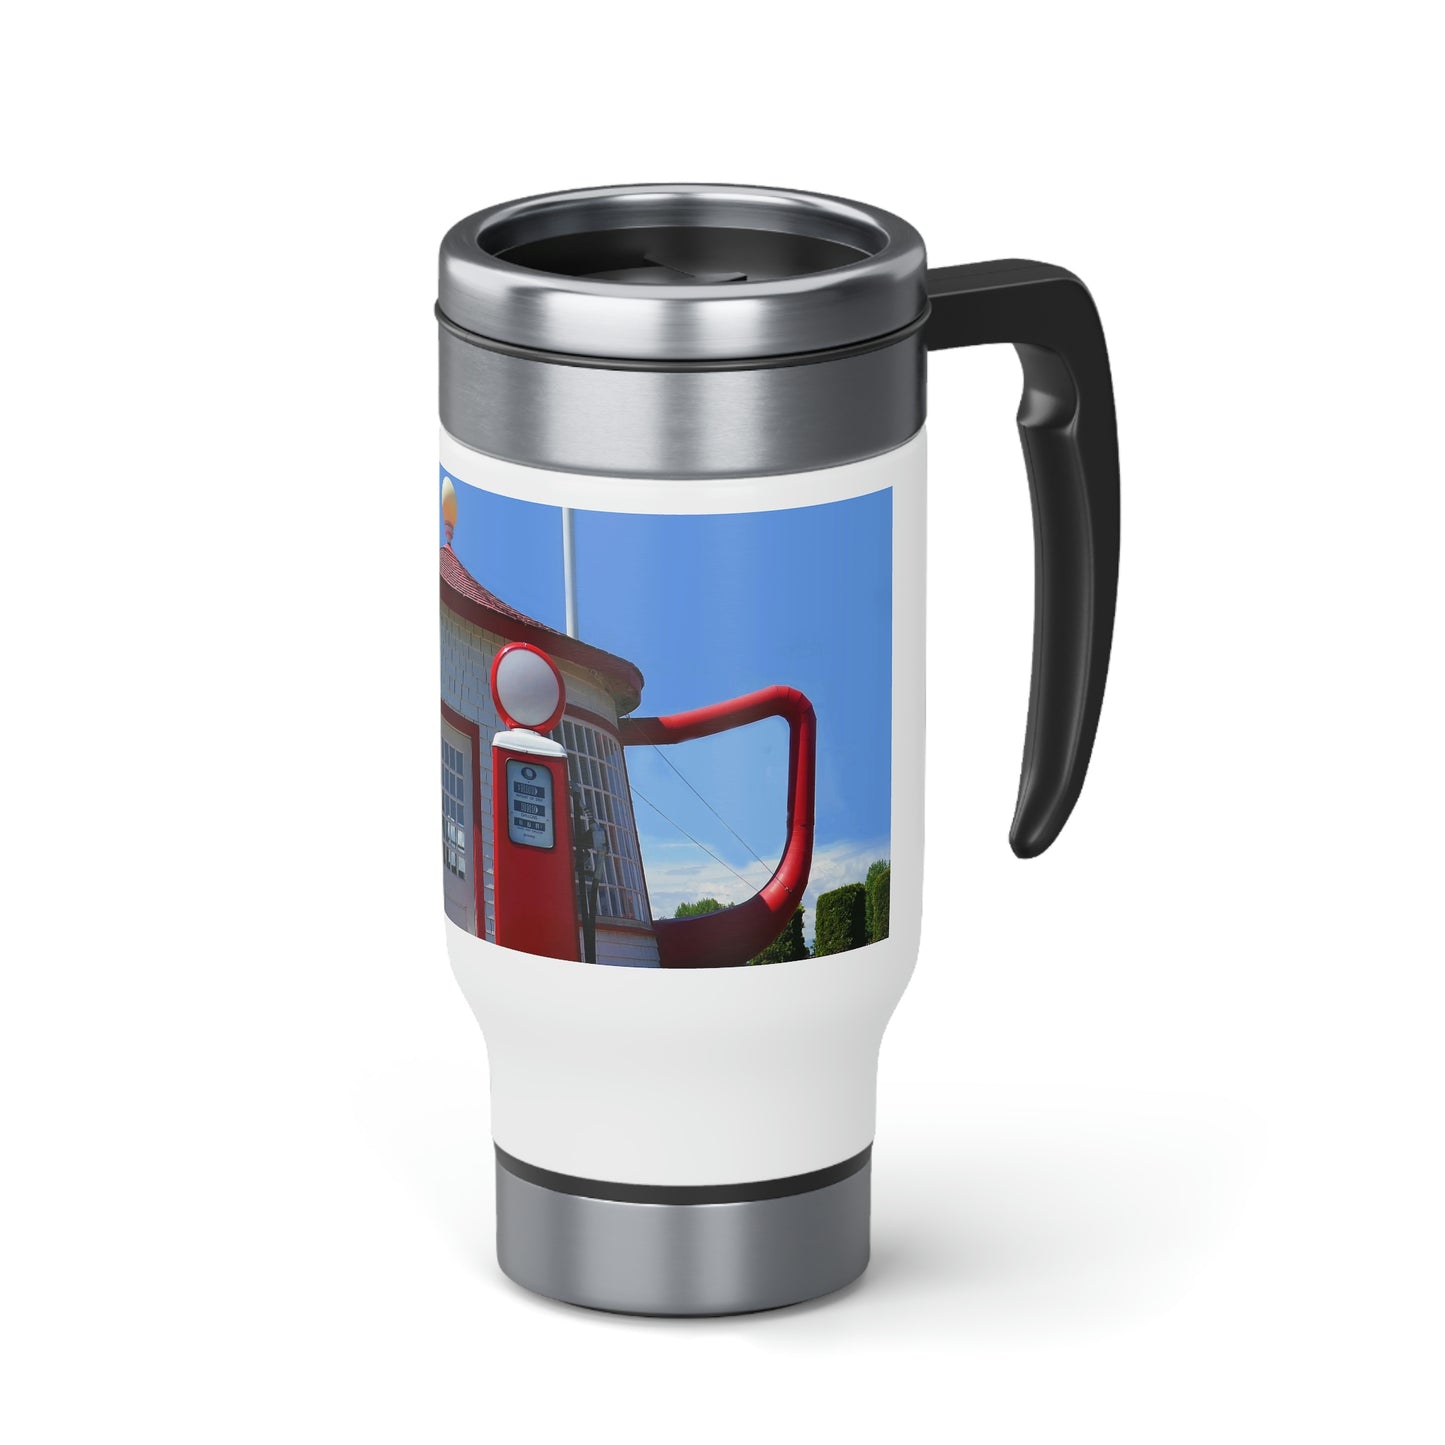 Awesome Teapot Dome Service Station  - Stainless Steel Travel Mug with Handle, 14oz - Fry1Productions